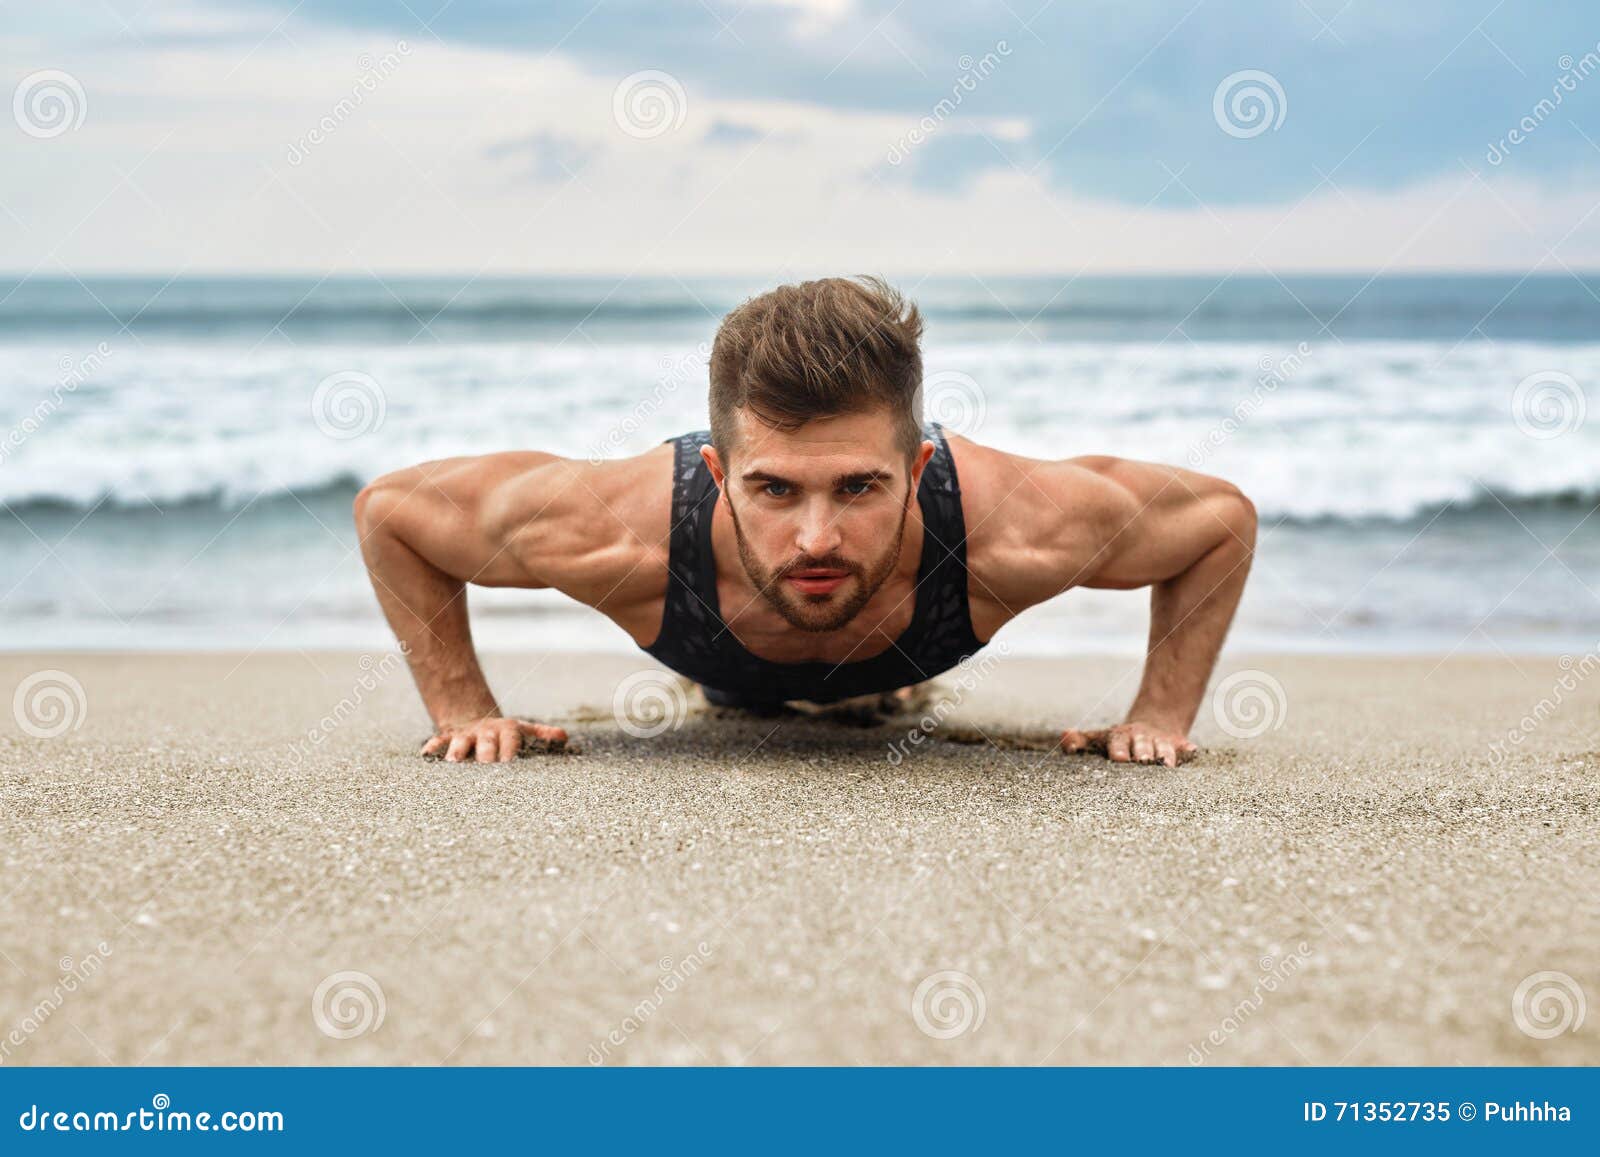 man exercising, doing push up exercises on beach. fitness workout